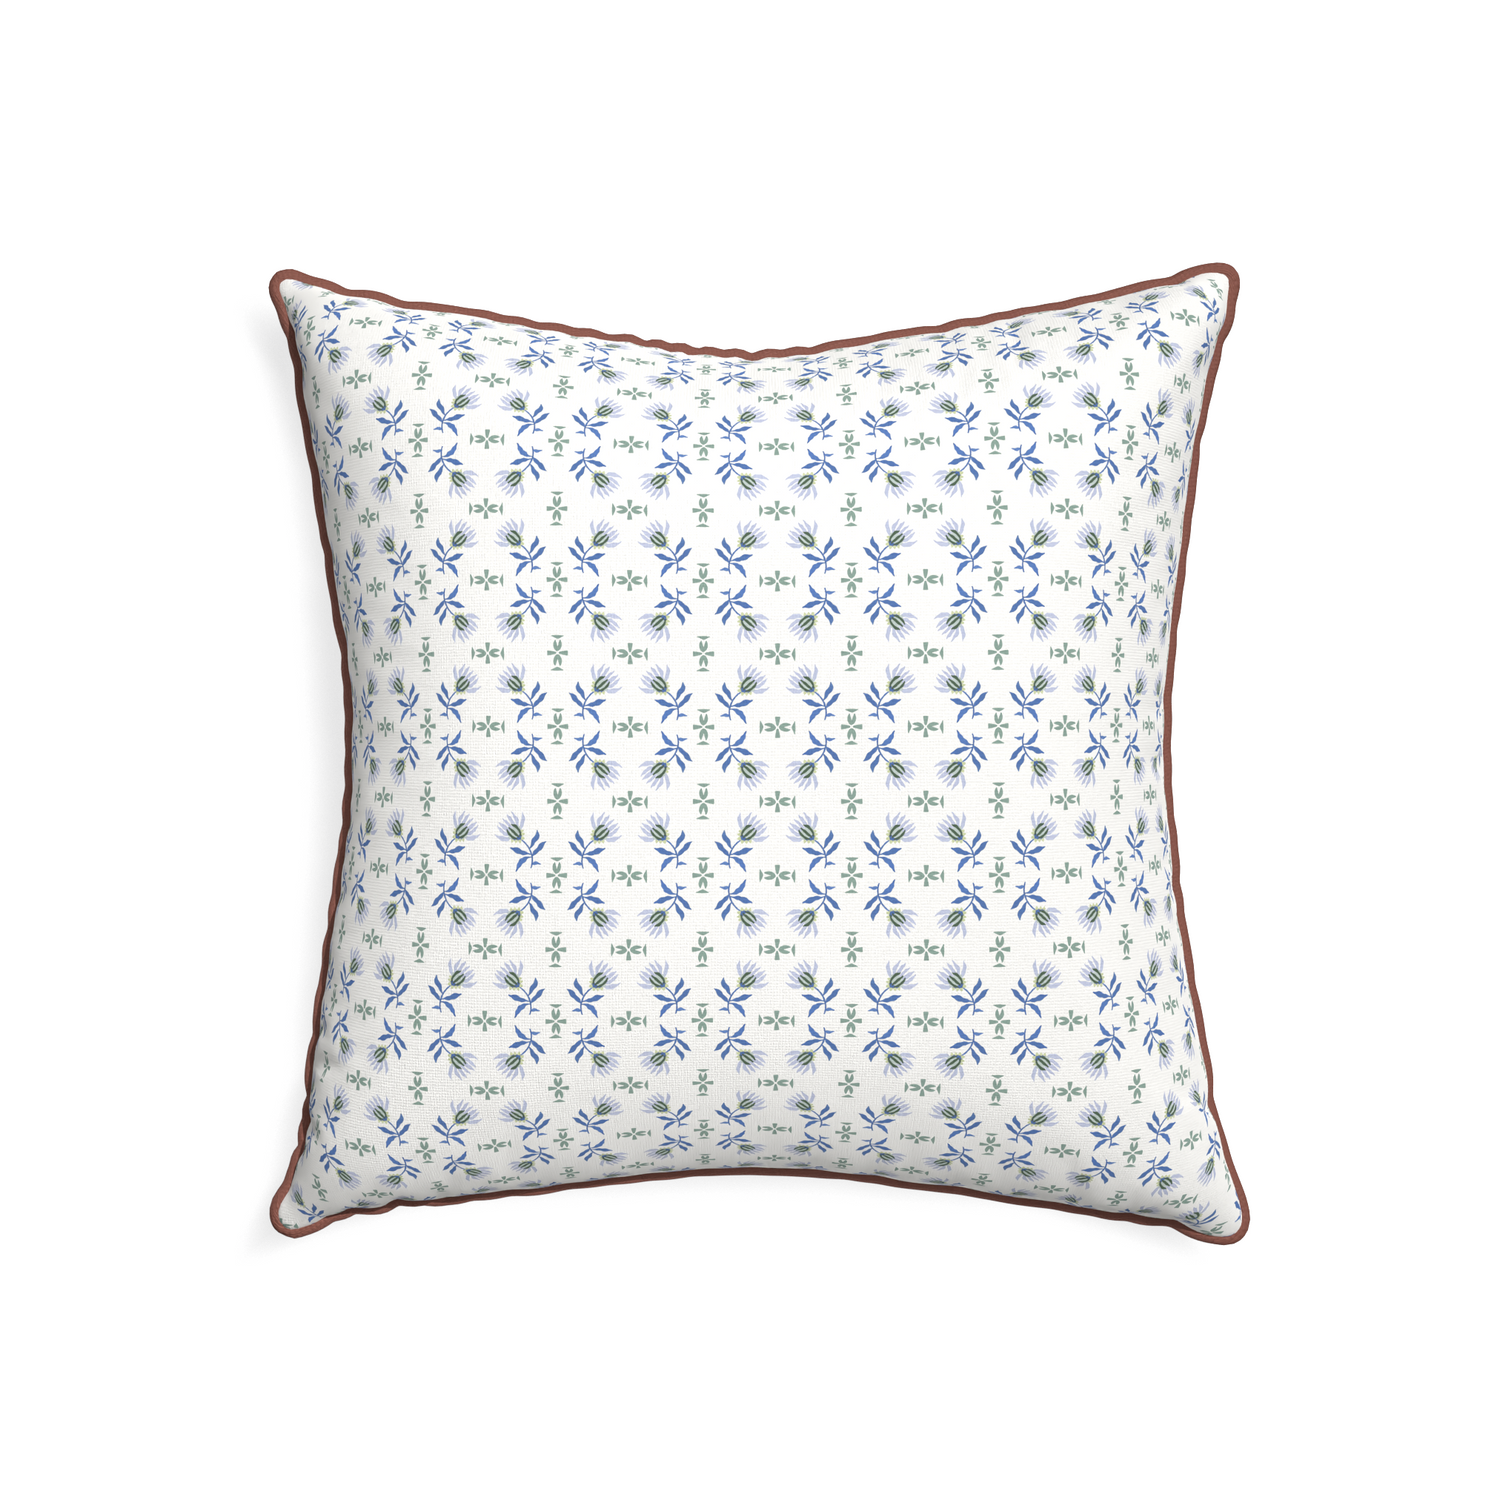 22-square lee custom blue & green floralpillow with w piping on white background